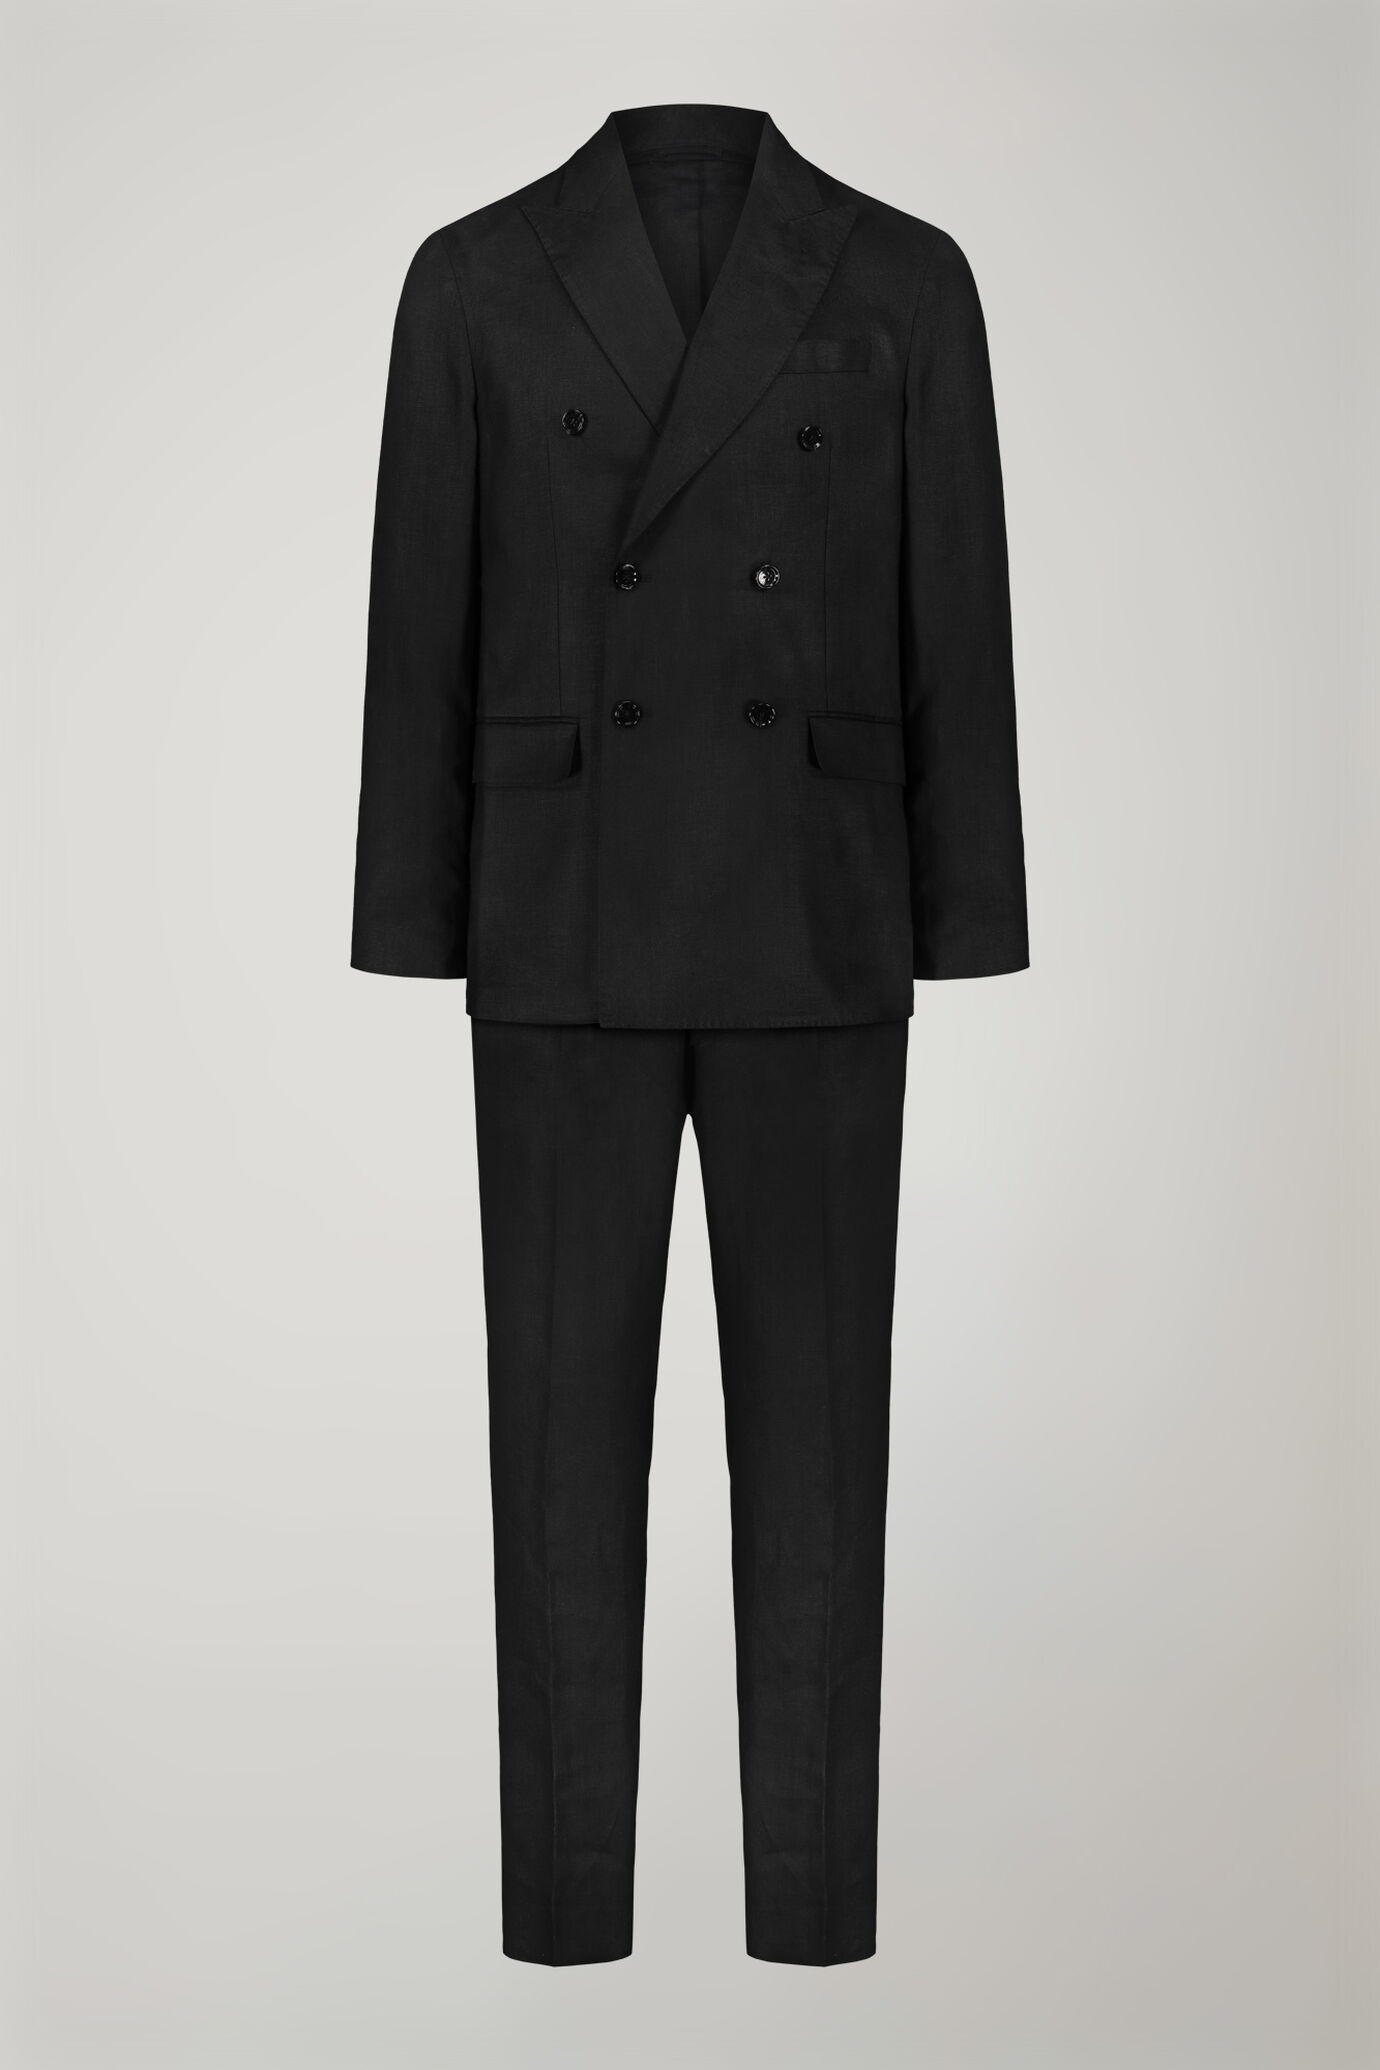 Men's double-breasted 100% linen regular fit suit image number 8